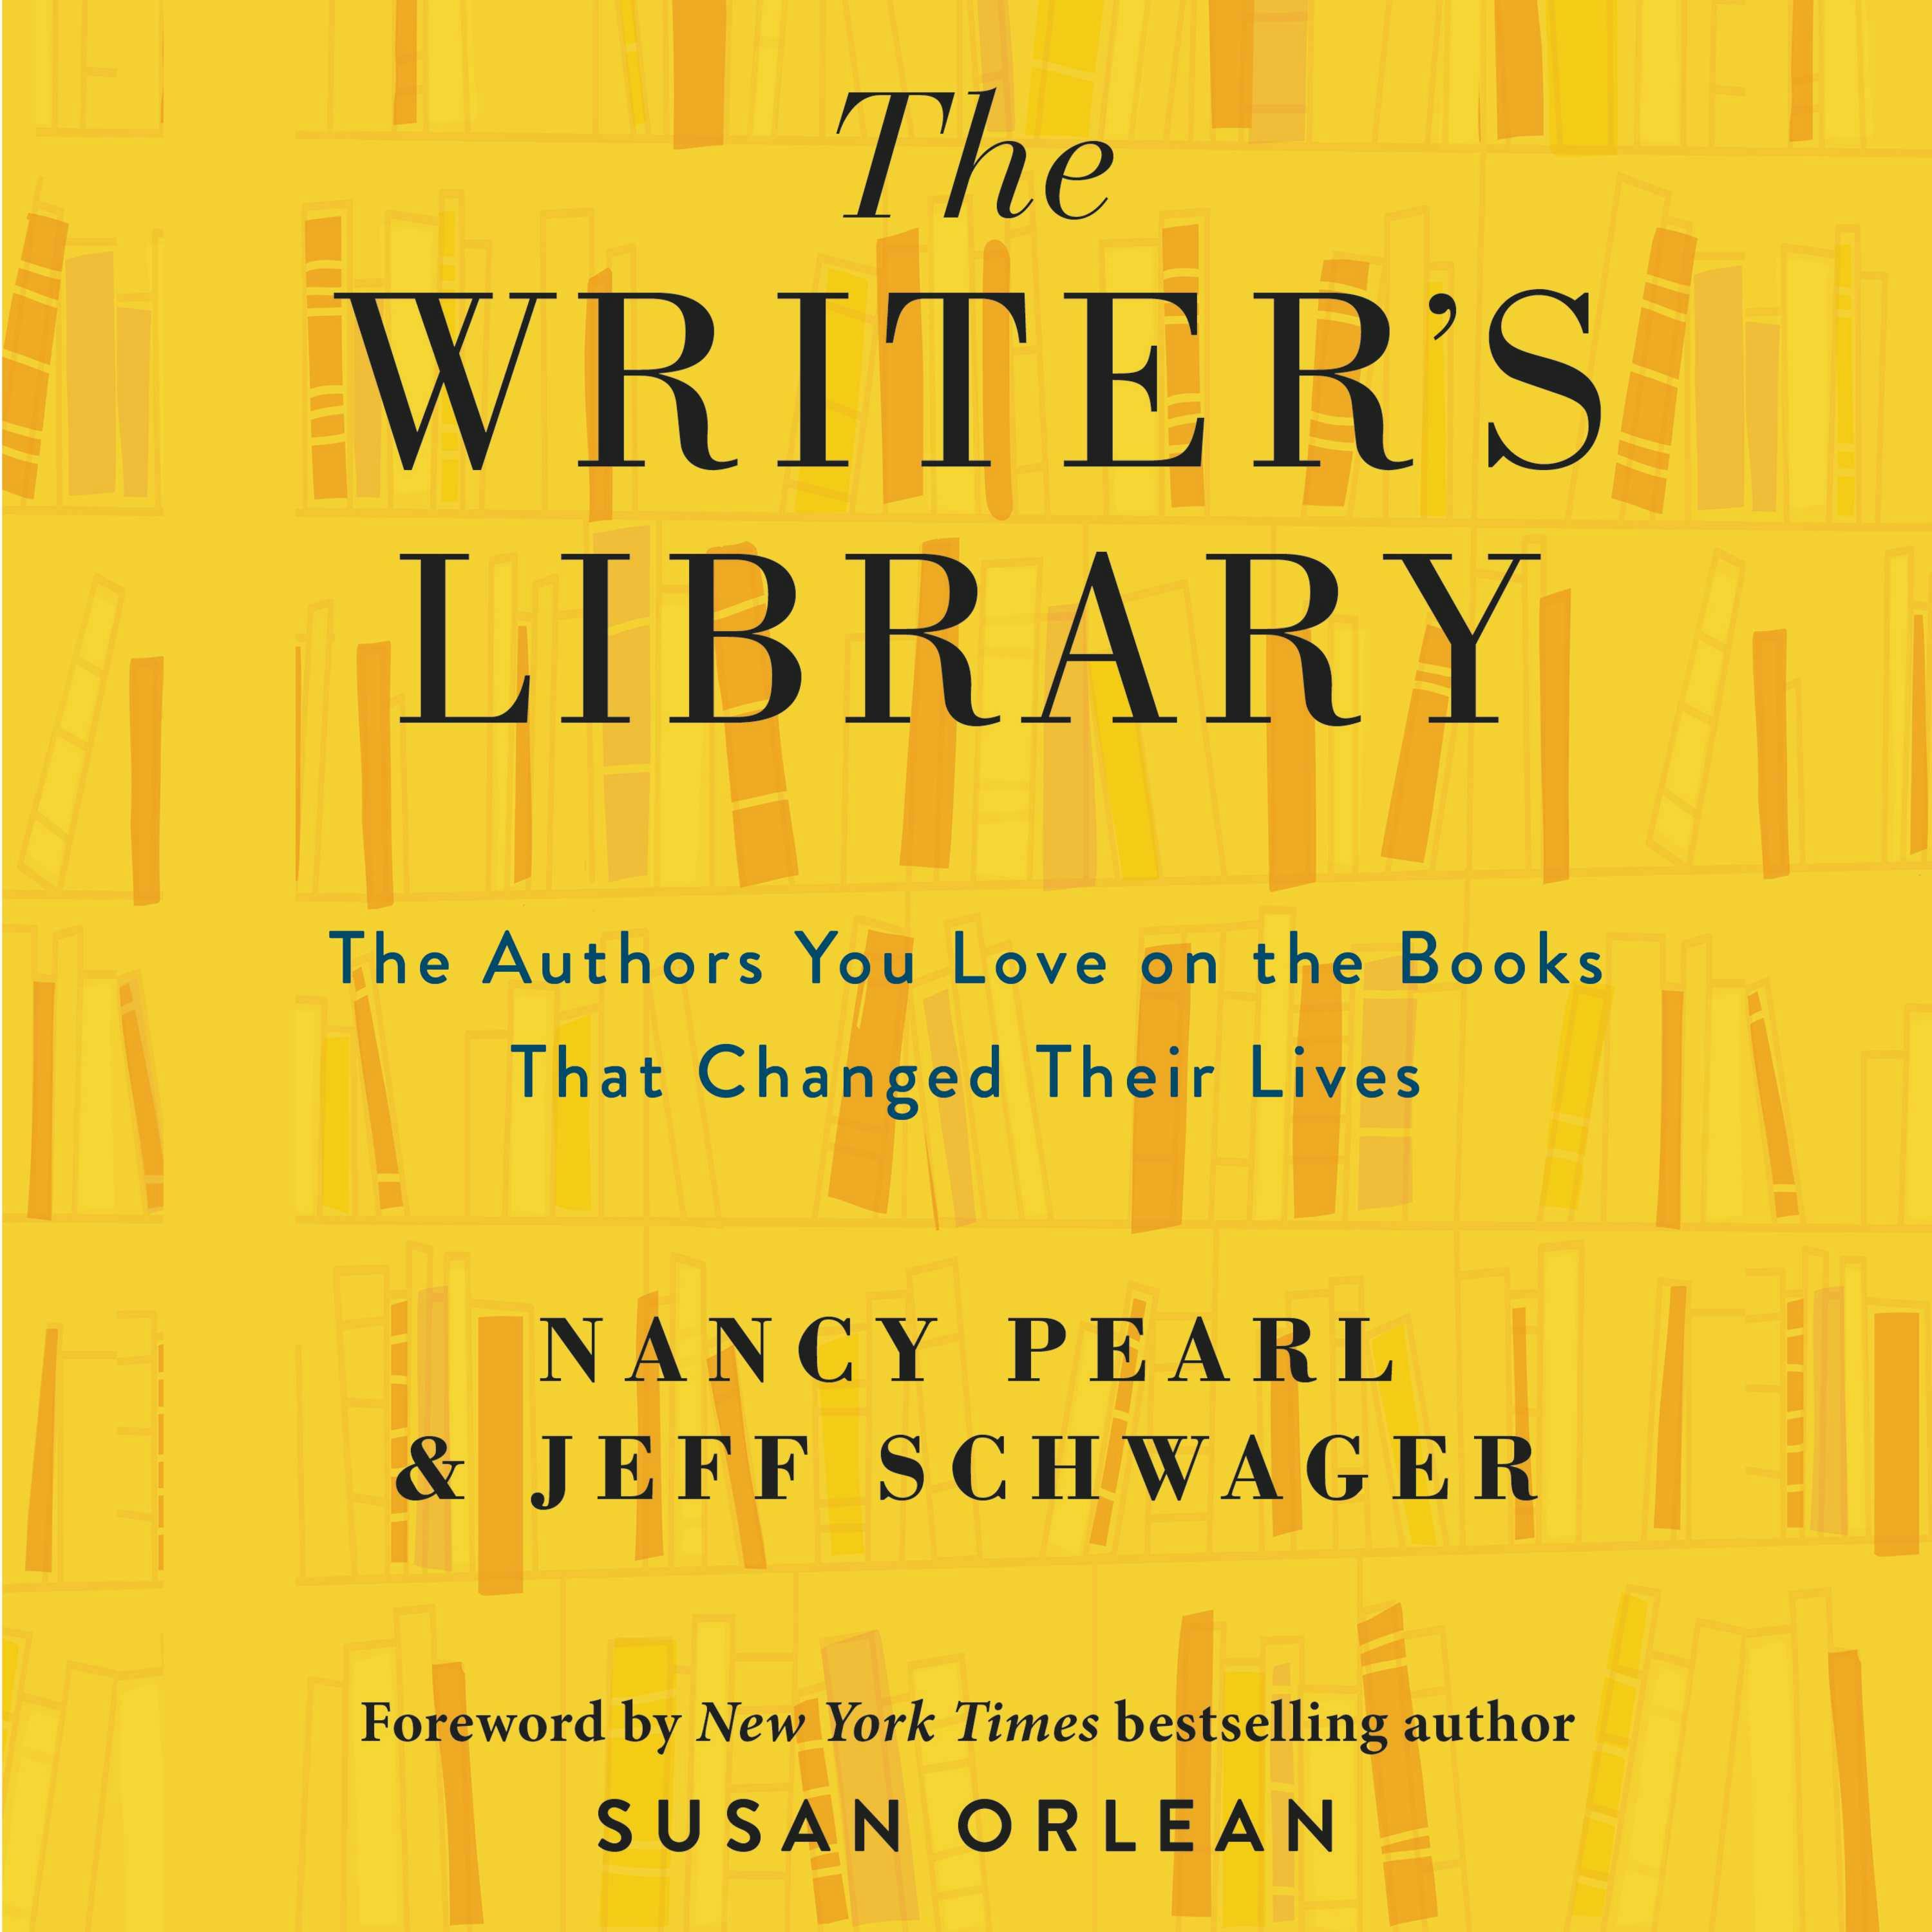 The Writer's Library: he Authors You Love on the Books That Changed Their Lives - Jeff Schwager, Nancy Pearl